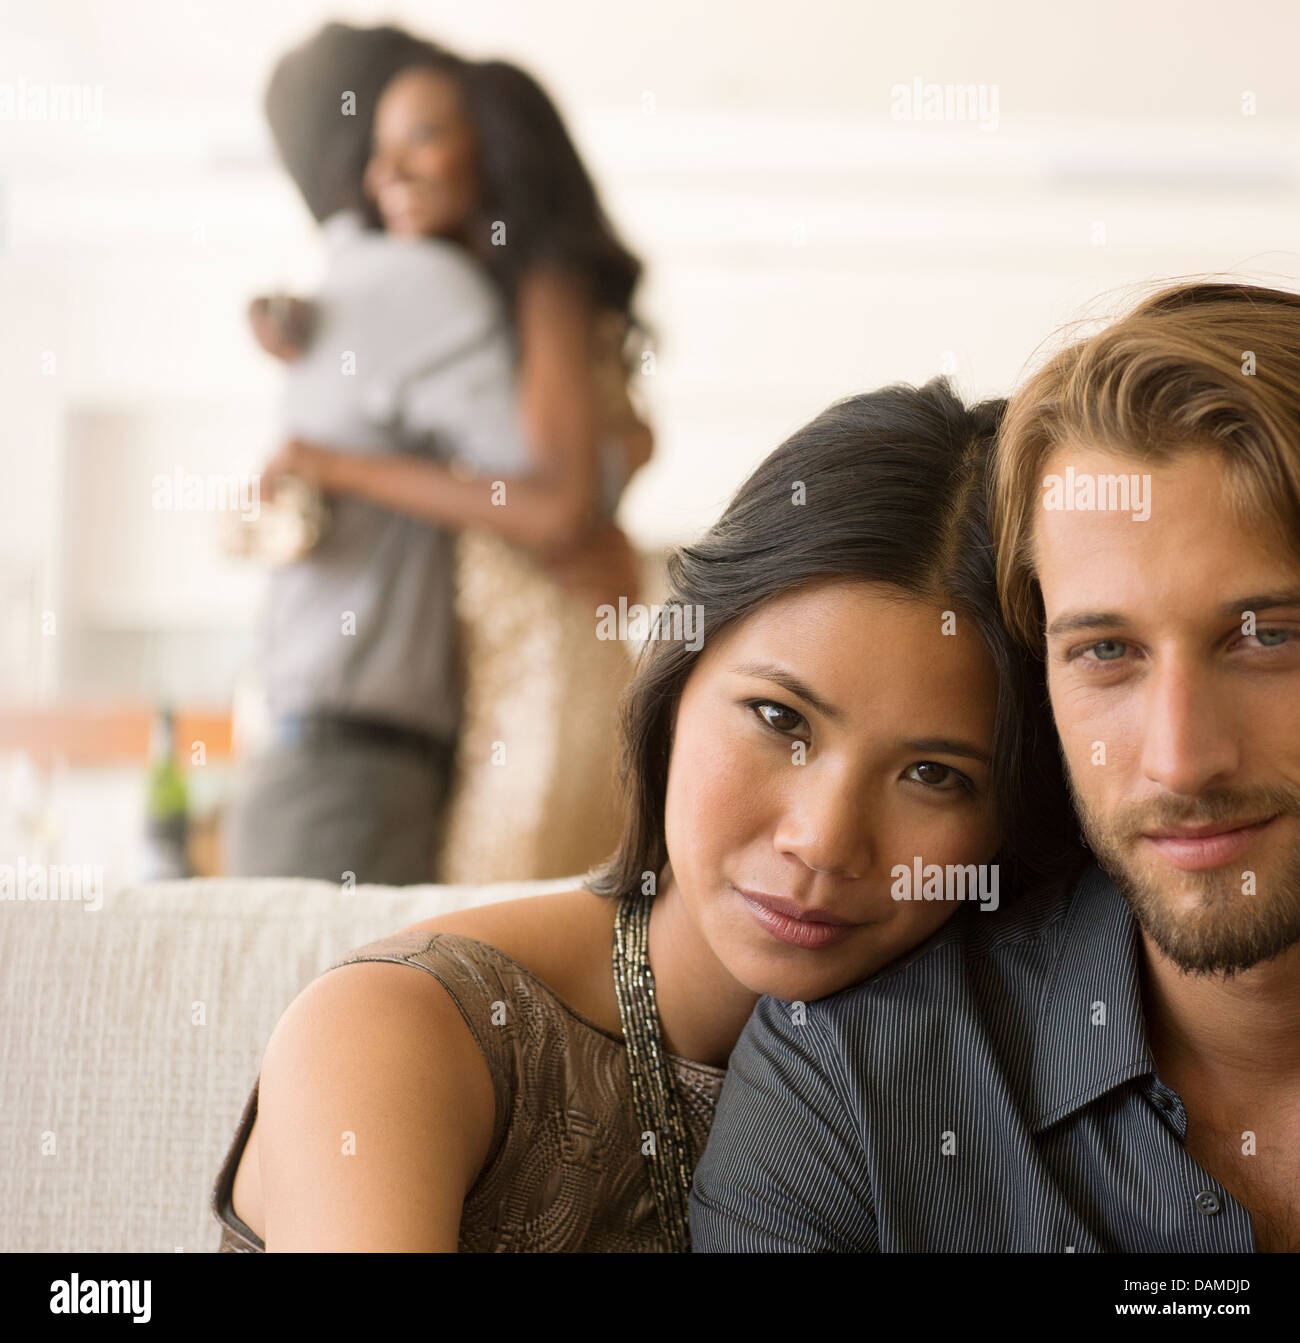 Couple hugging on sofa Banque D'Images